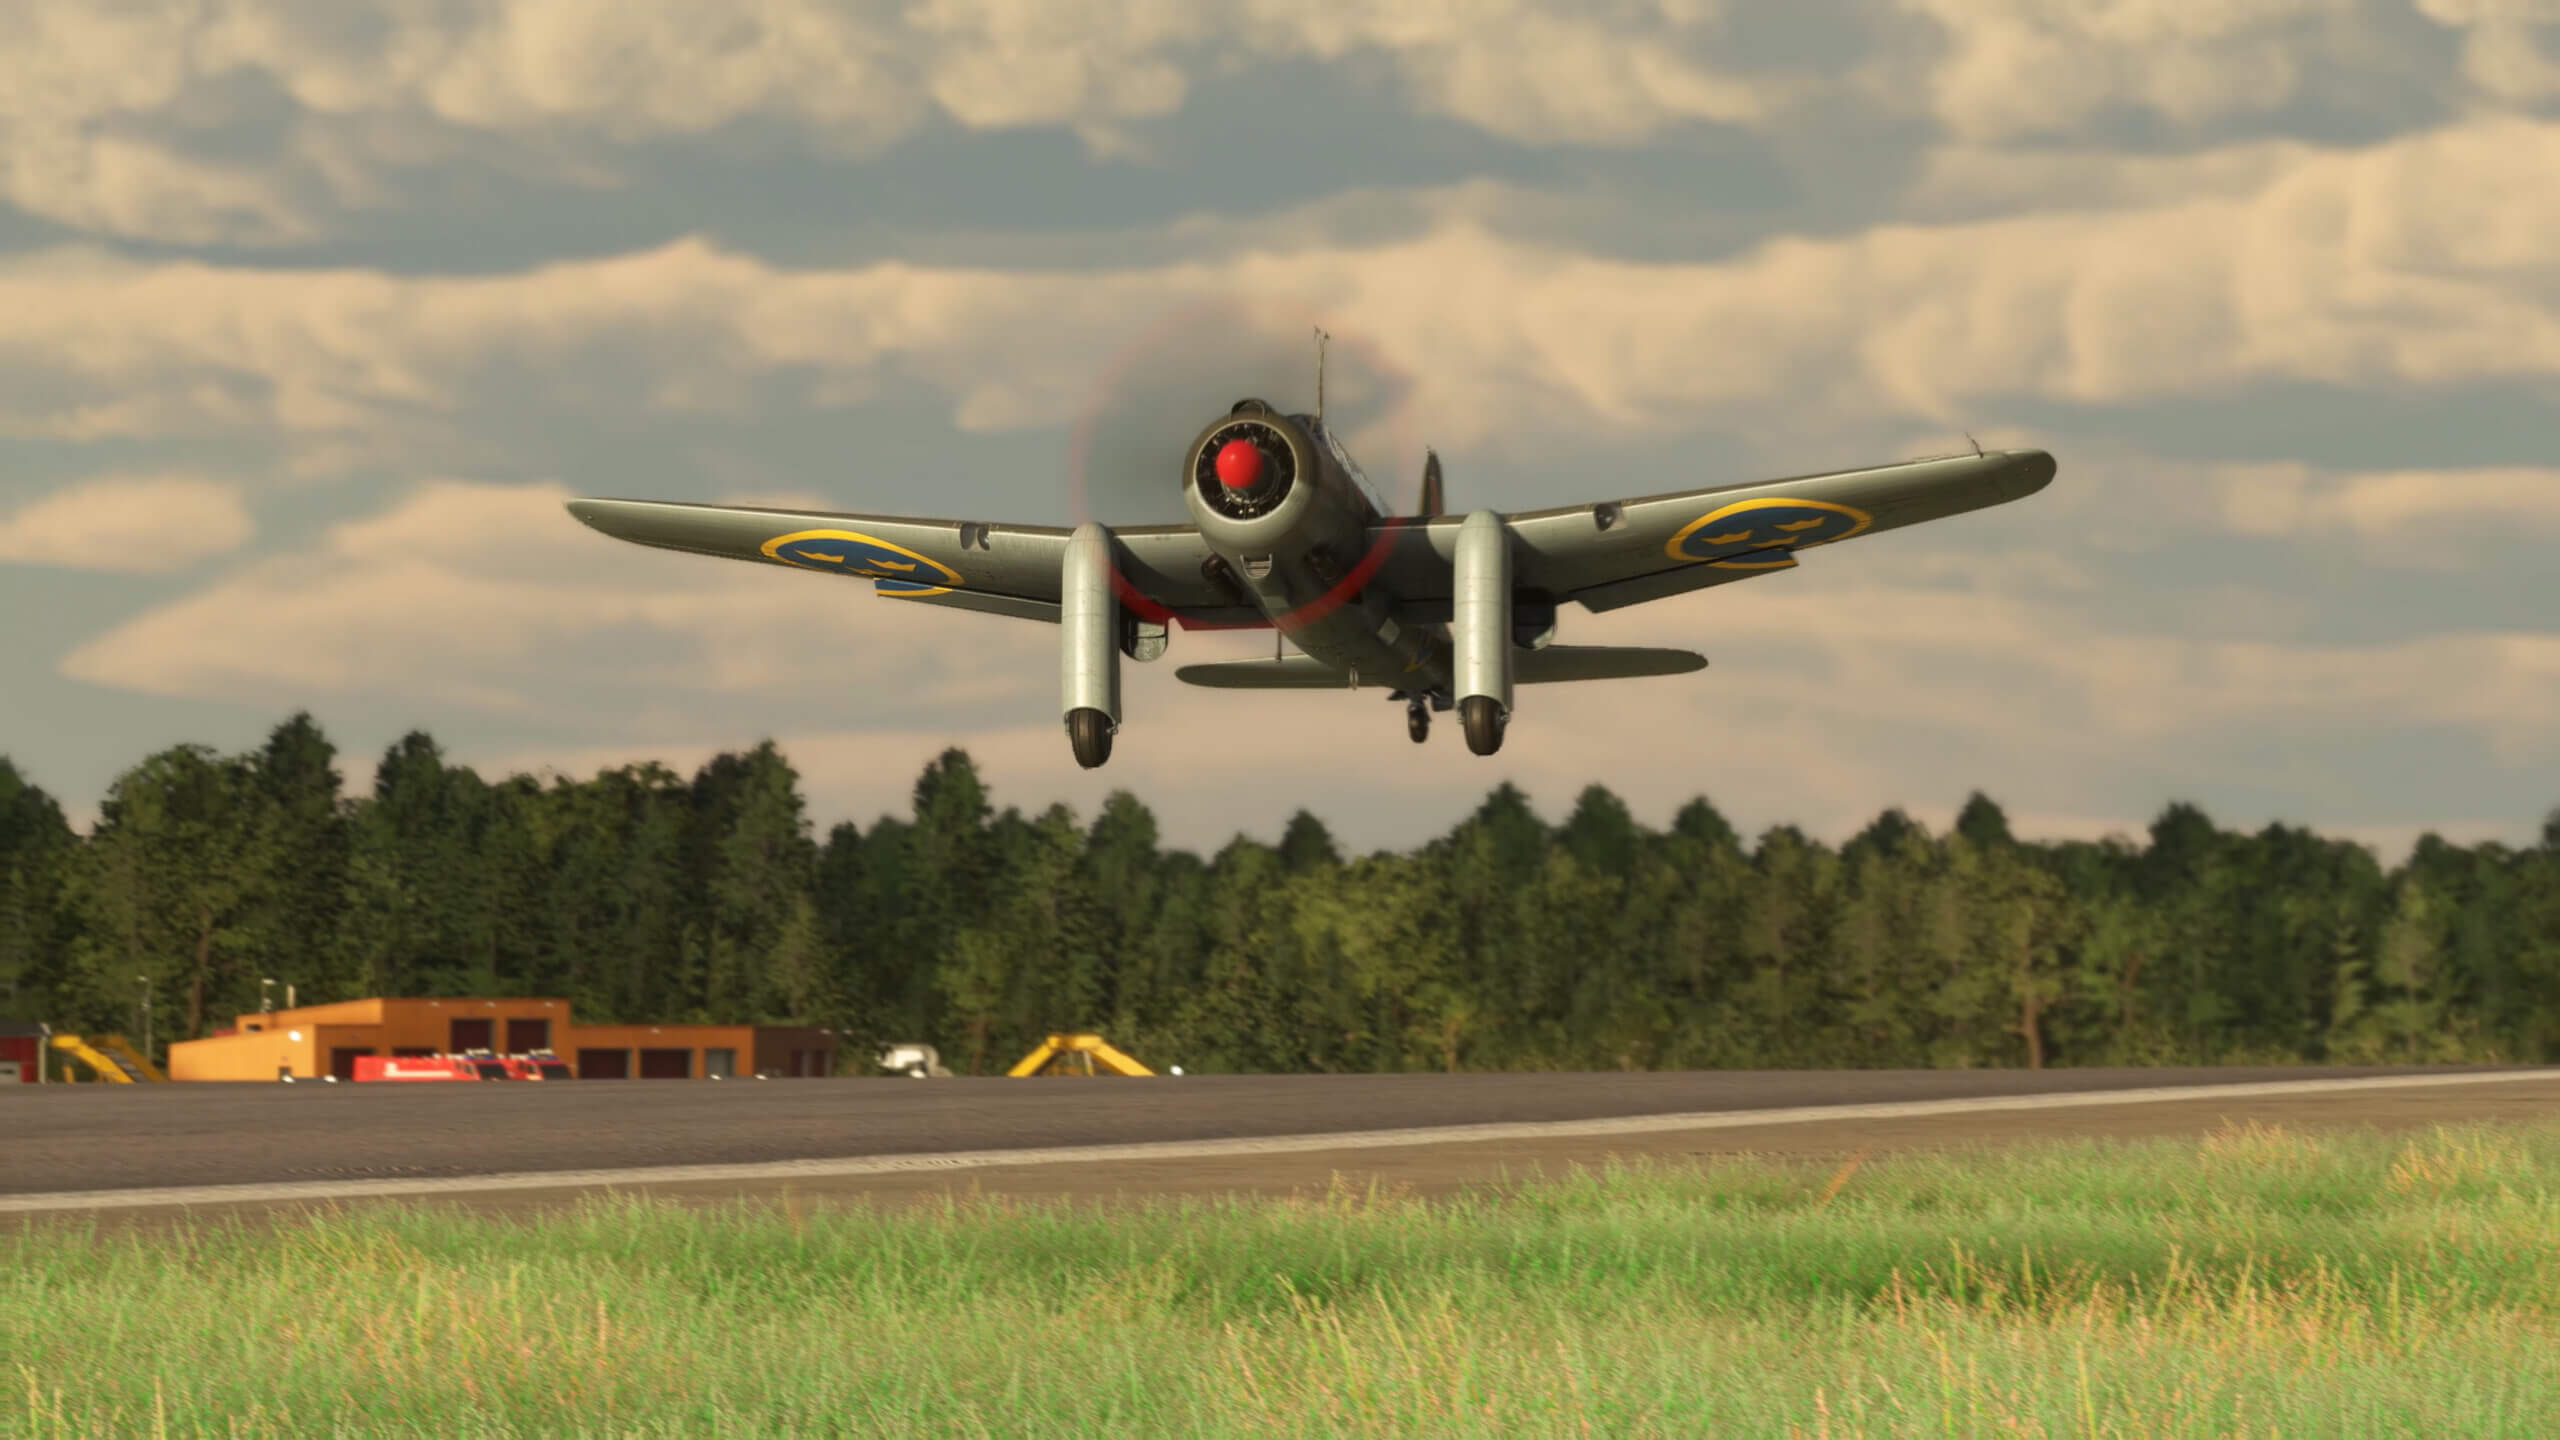 A Saab B 17 at low altitude about to land